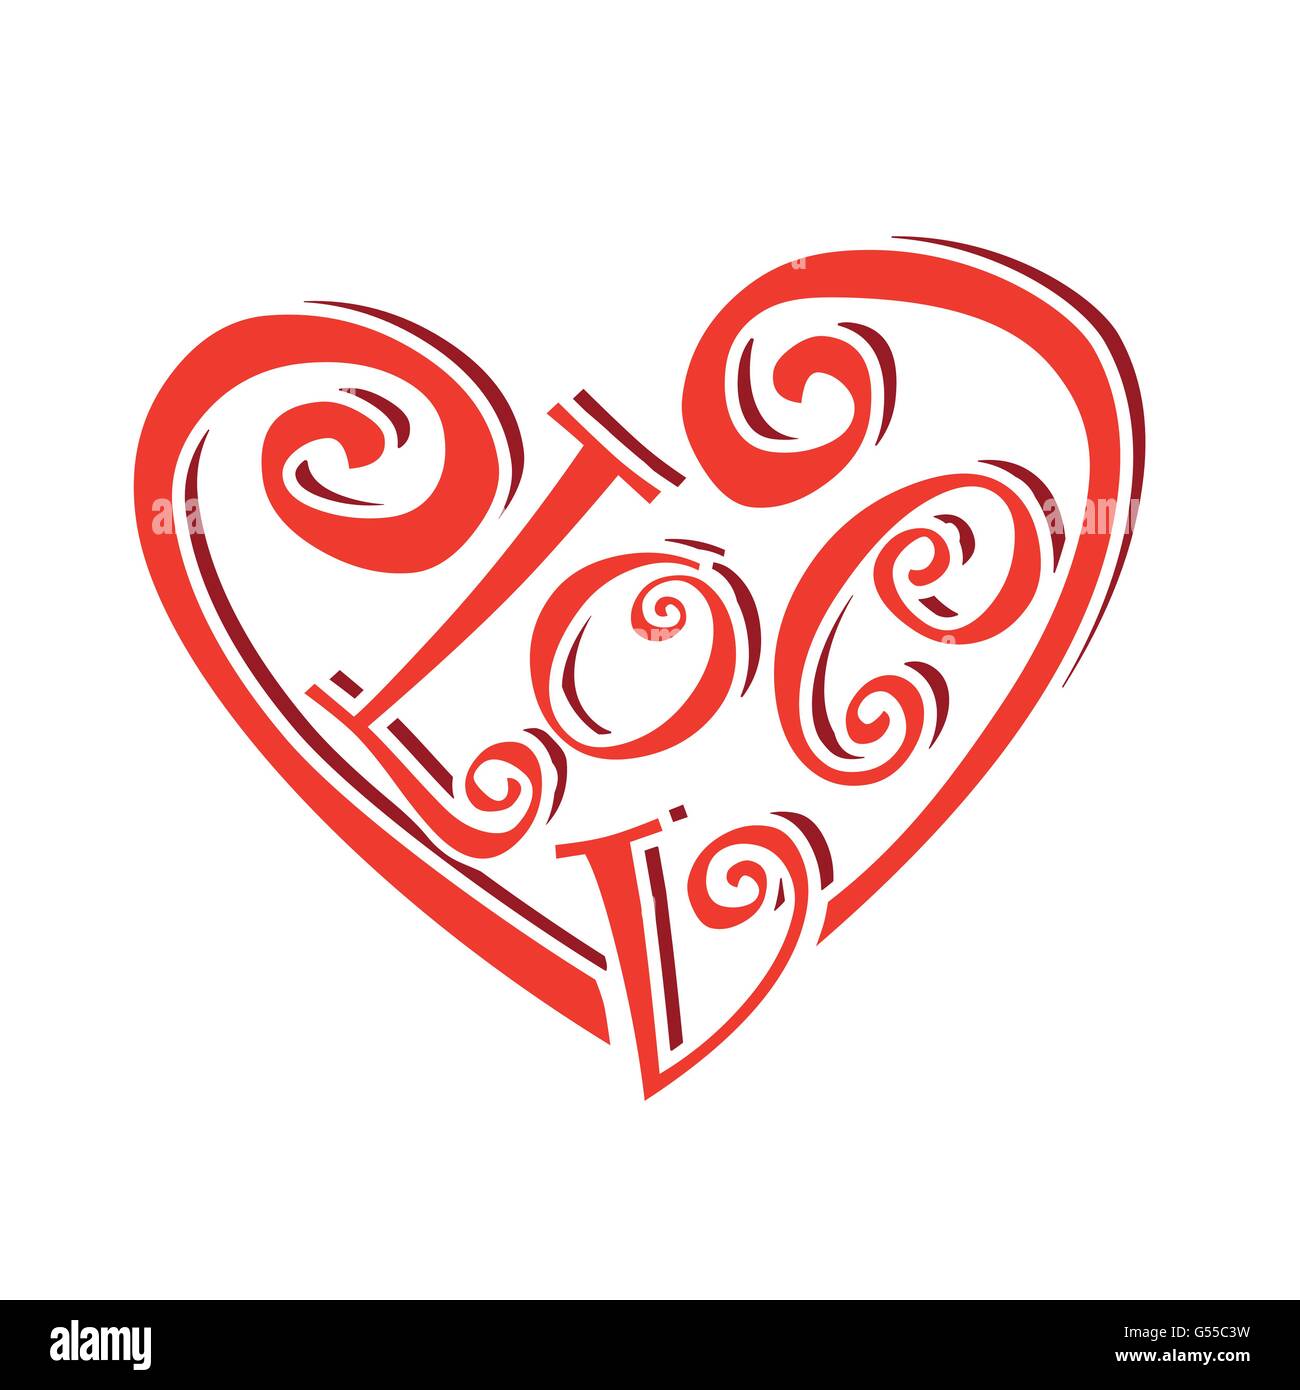 heart symbol text love concept valentines day caligraphic lettering vector illustration Stock Vector